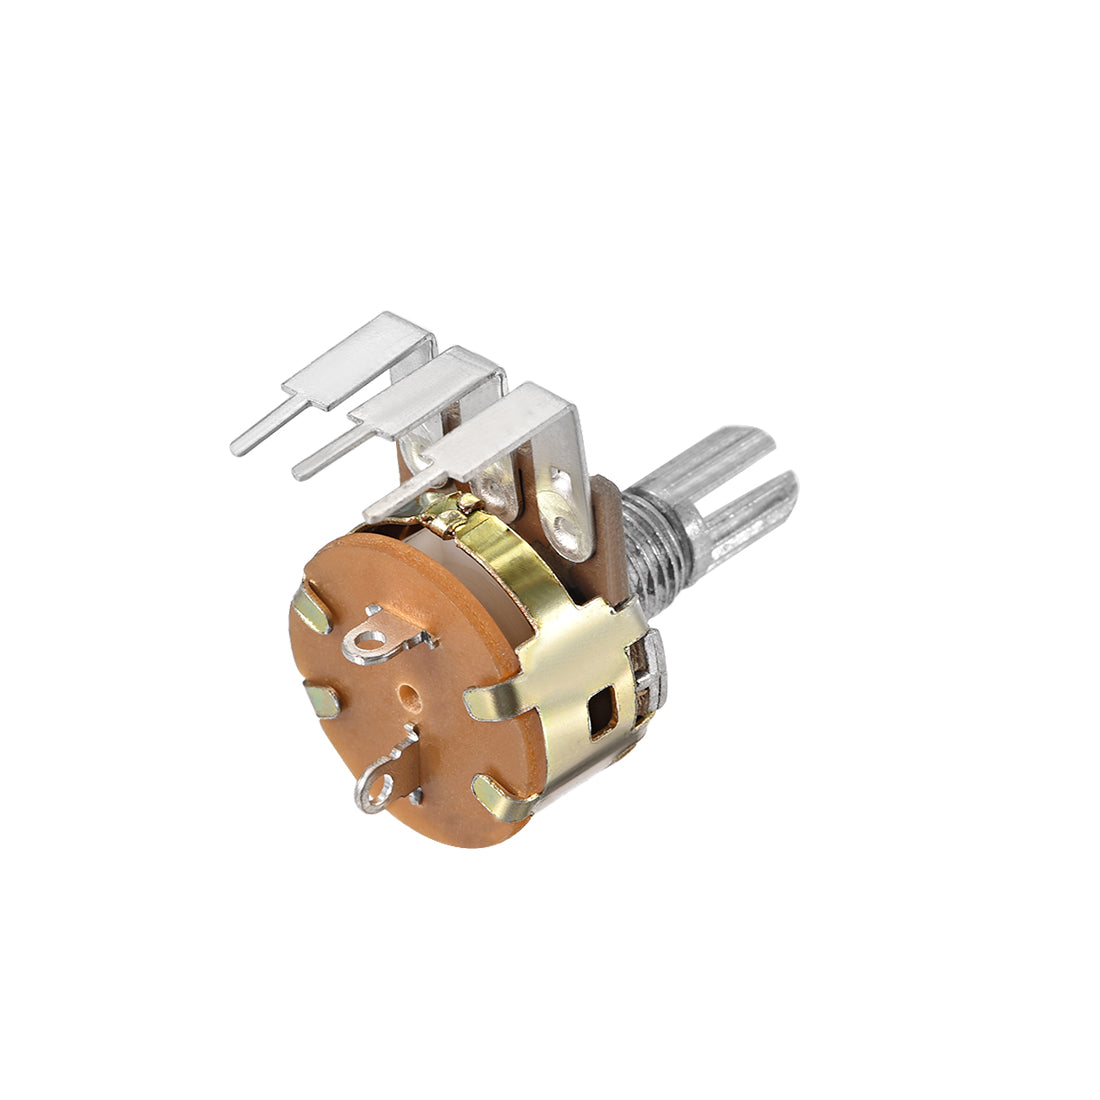 uxcell Uxcell WH148 Potentiometer with Switch 500K Ohm Variable Resistors Single Turn Rotary Carbon Film Taper 5pcs